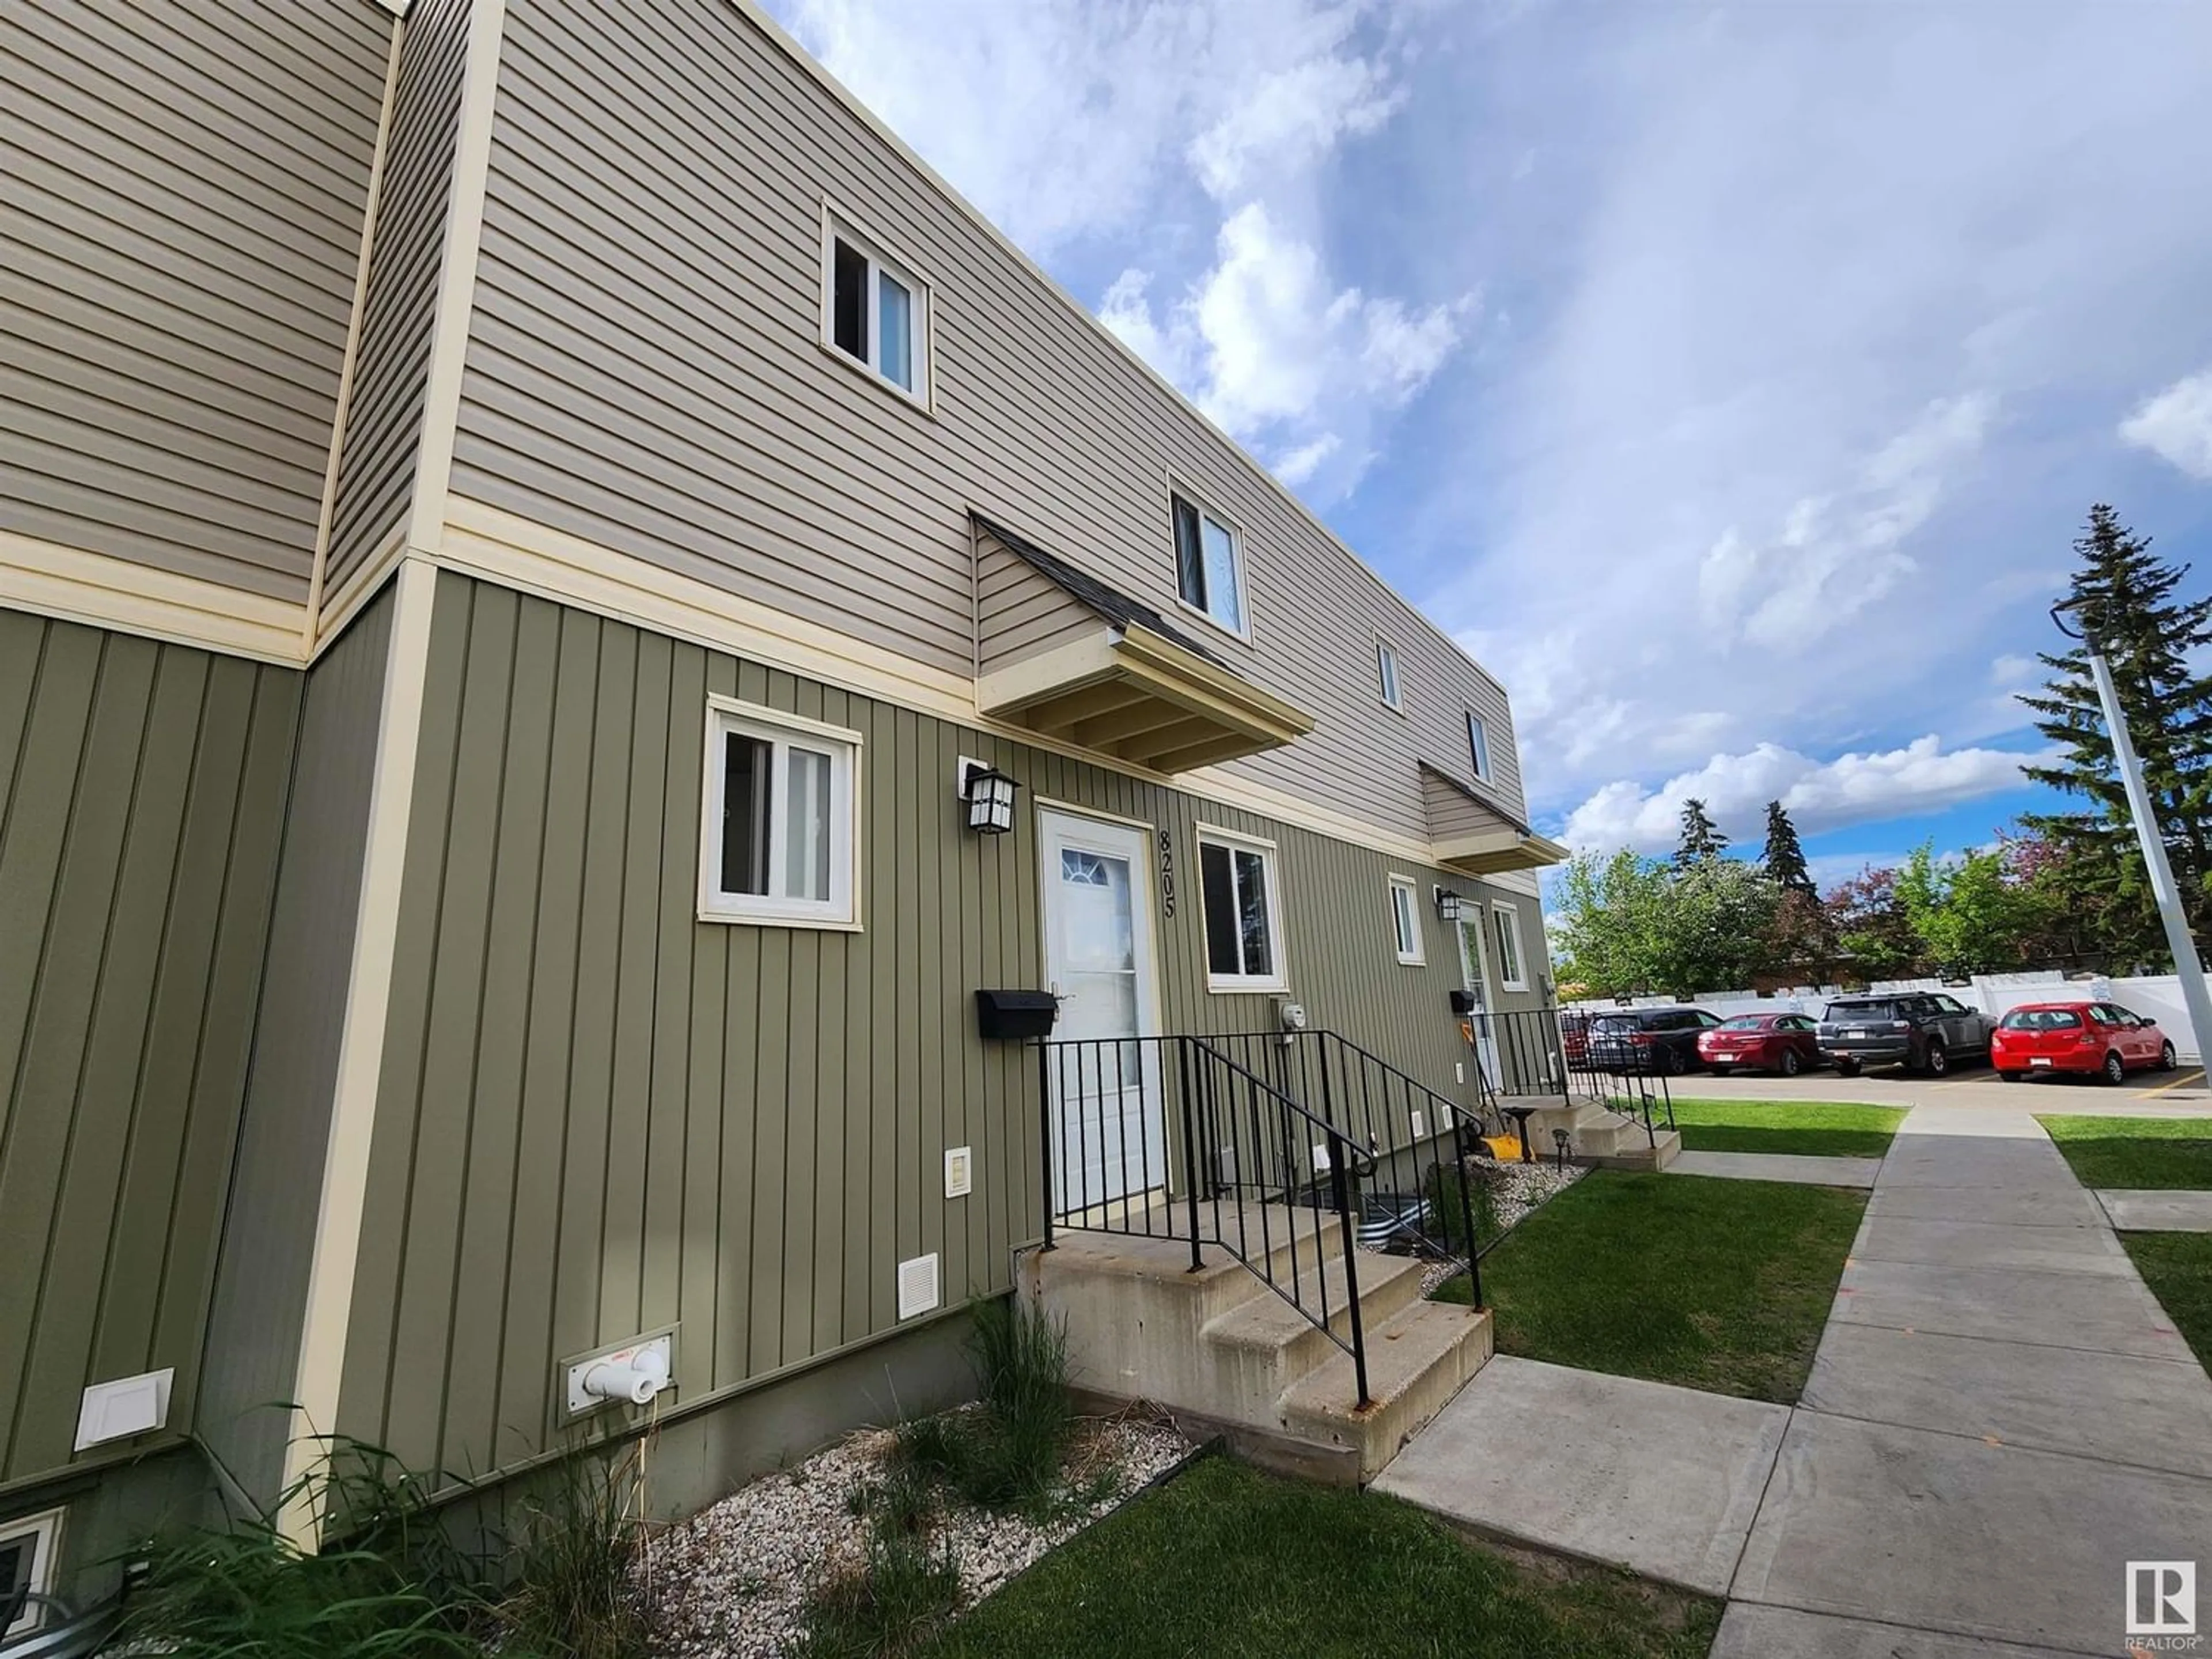 A pic from exterior of the house or condo for 8205 182 ST NW, Edmonton Alberta T5T1L2